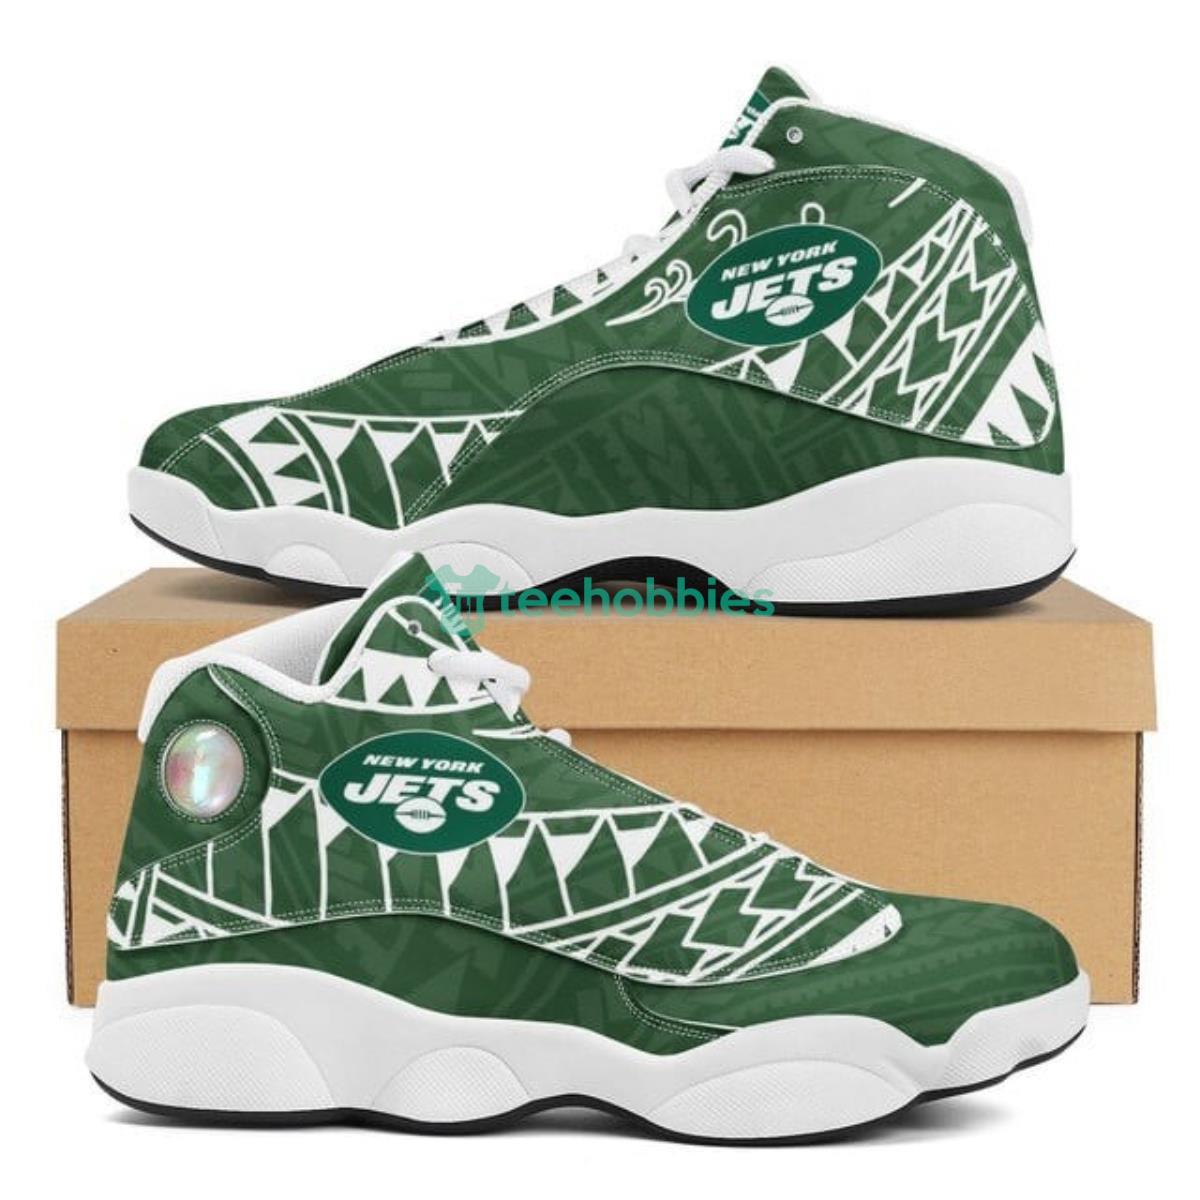 New York Jets Air Jordan 13 Shoes Running Casual Sneakers Product Photo 1